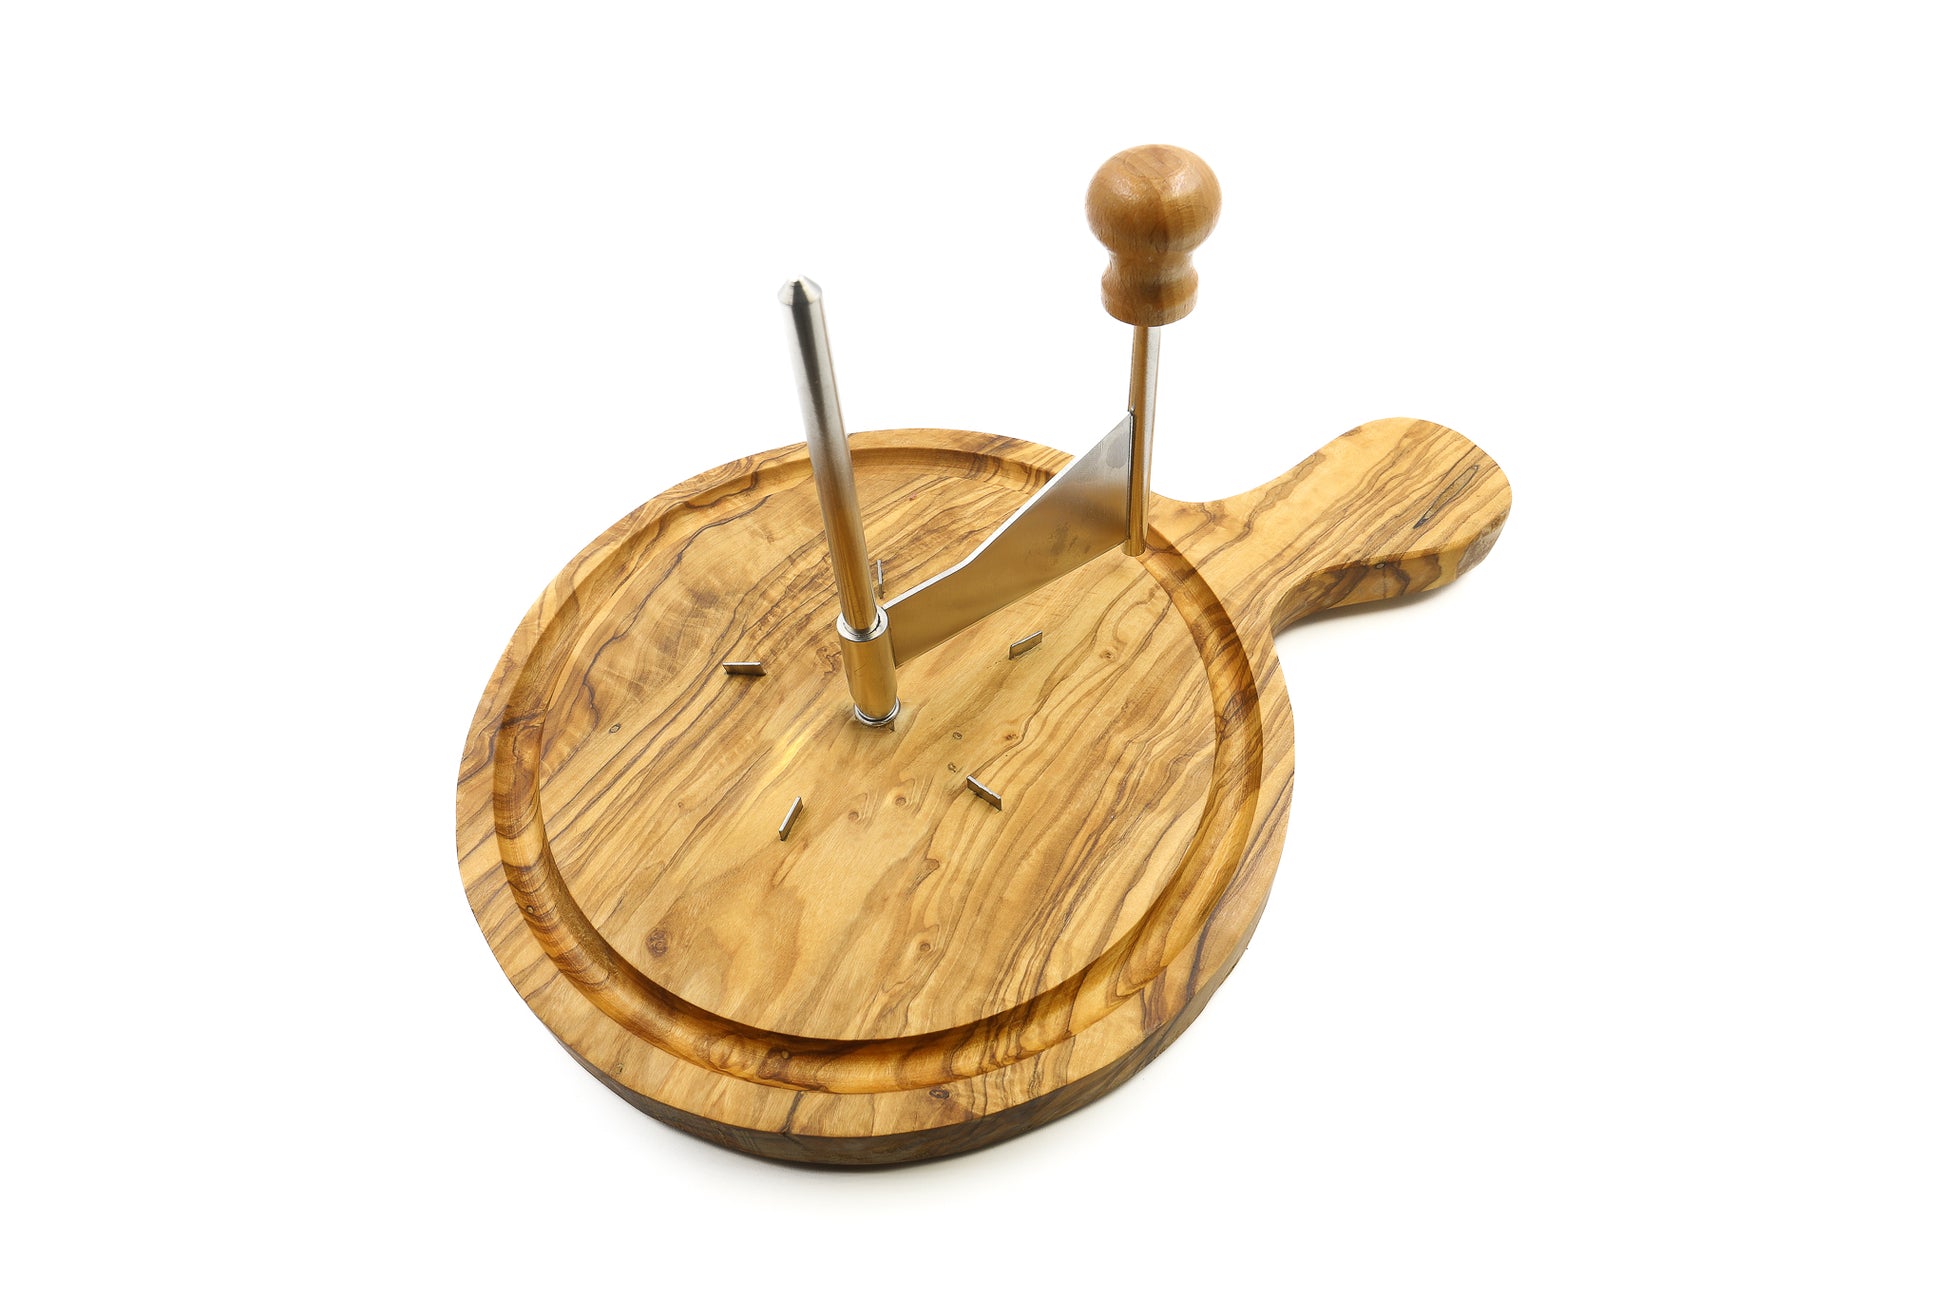 Handcrafted olive wood cheese board featuring a stainless steel platter and cheese shaver